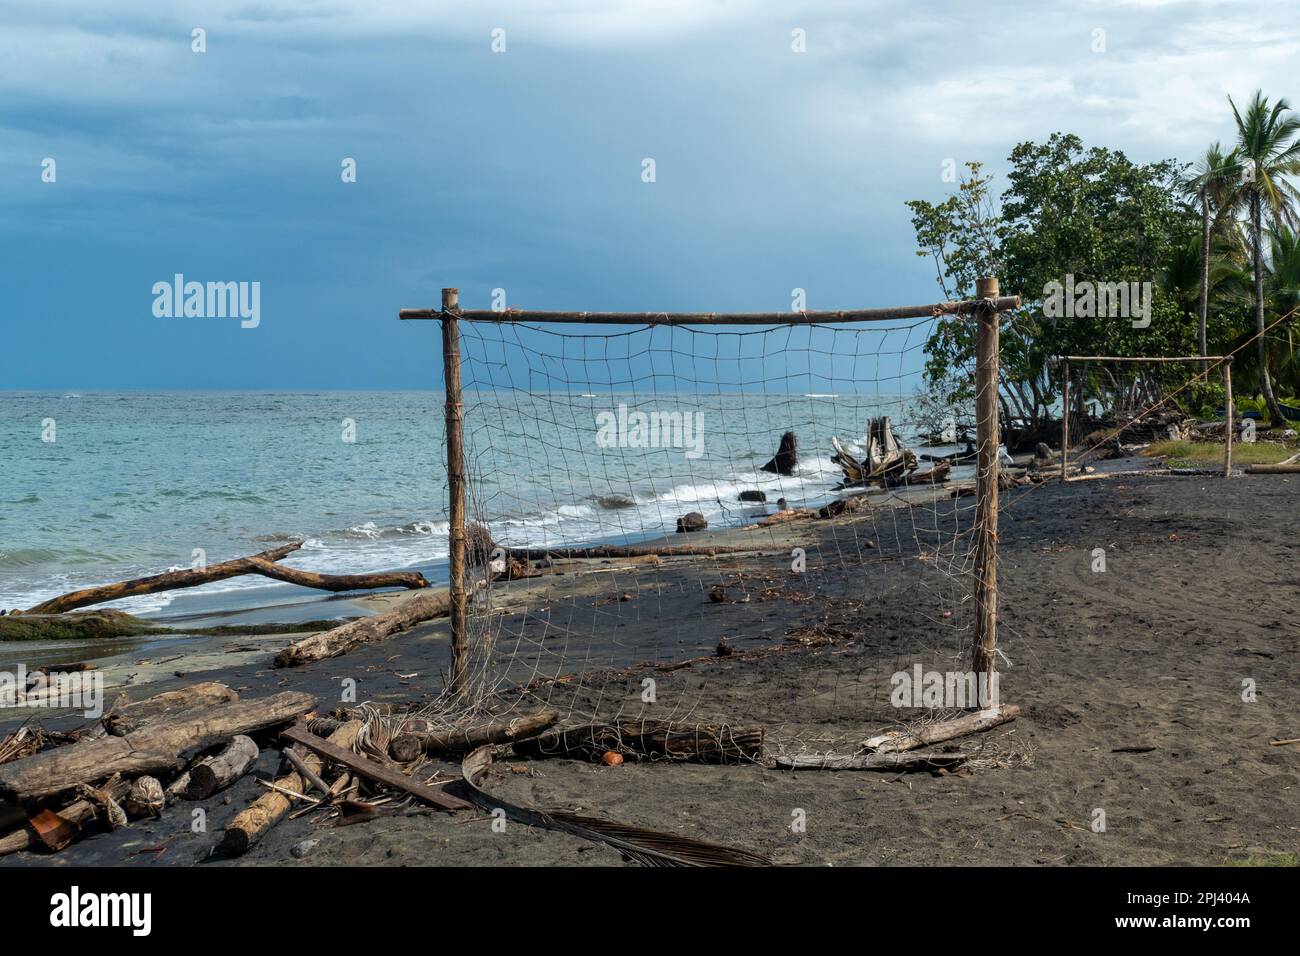 scenic  beach of Cocles on the Caribbean side of Costa Rica, Puerto Viejo de Talamanca with an handmade soccer coal made of palm trees Stock Photo